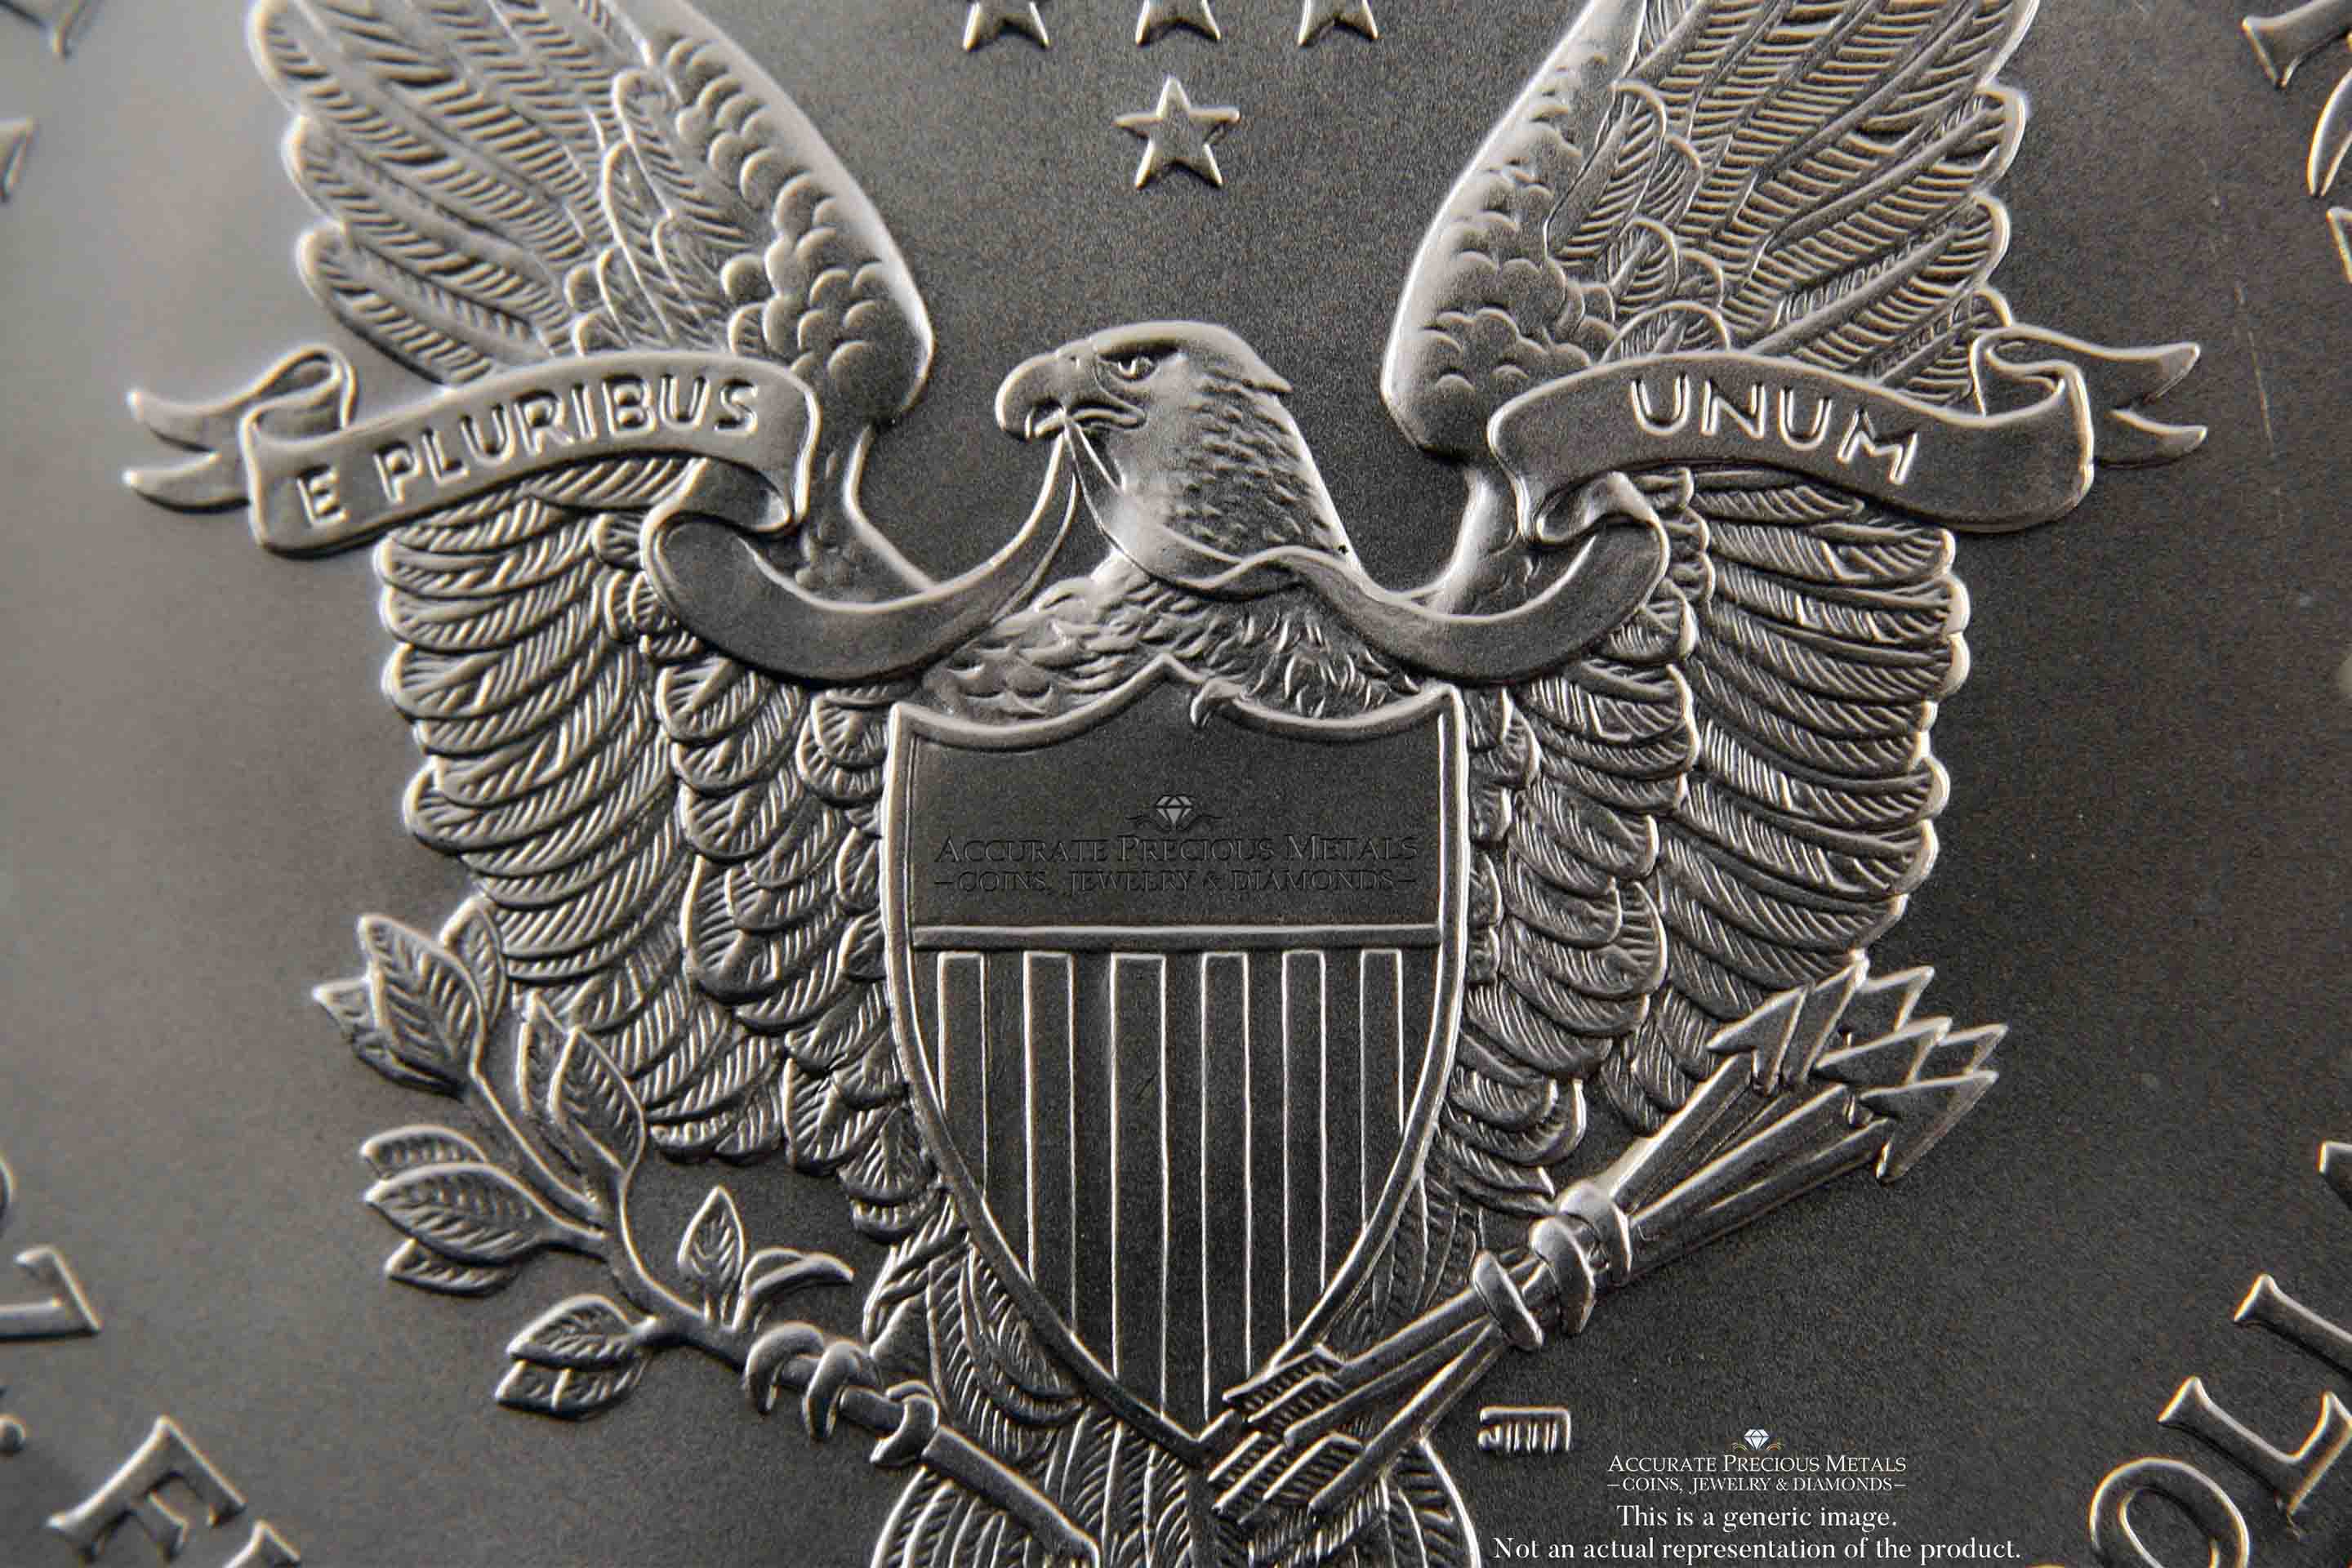 5 Ounce Silvertowne American Flag Silver Bar: Patriotic silver bar by Silvertowne, perfect for collectors and investors.